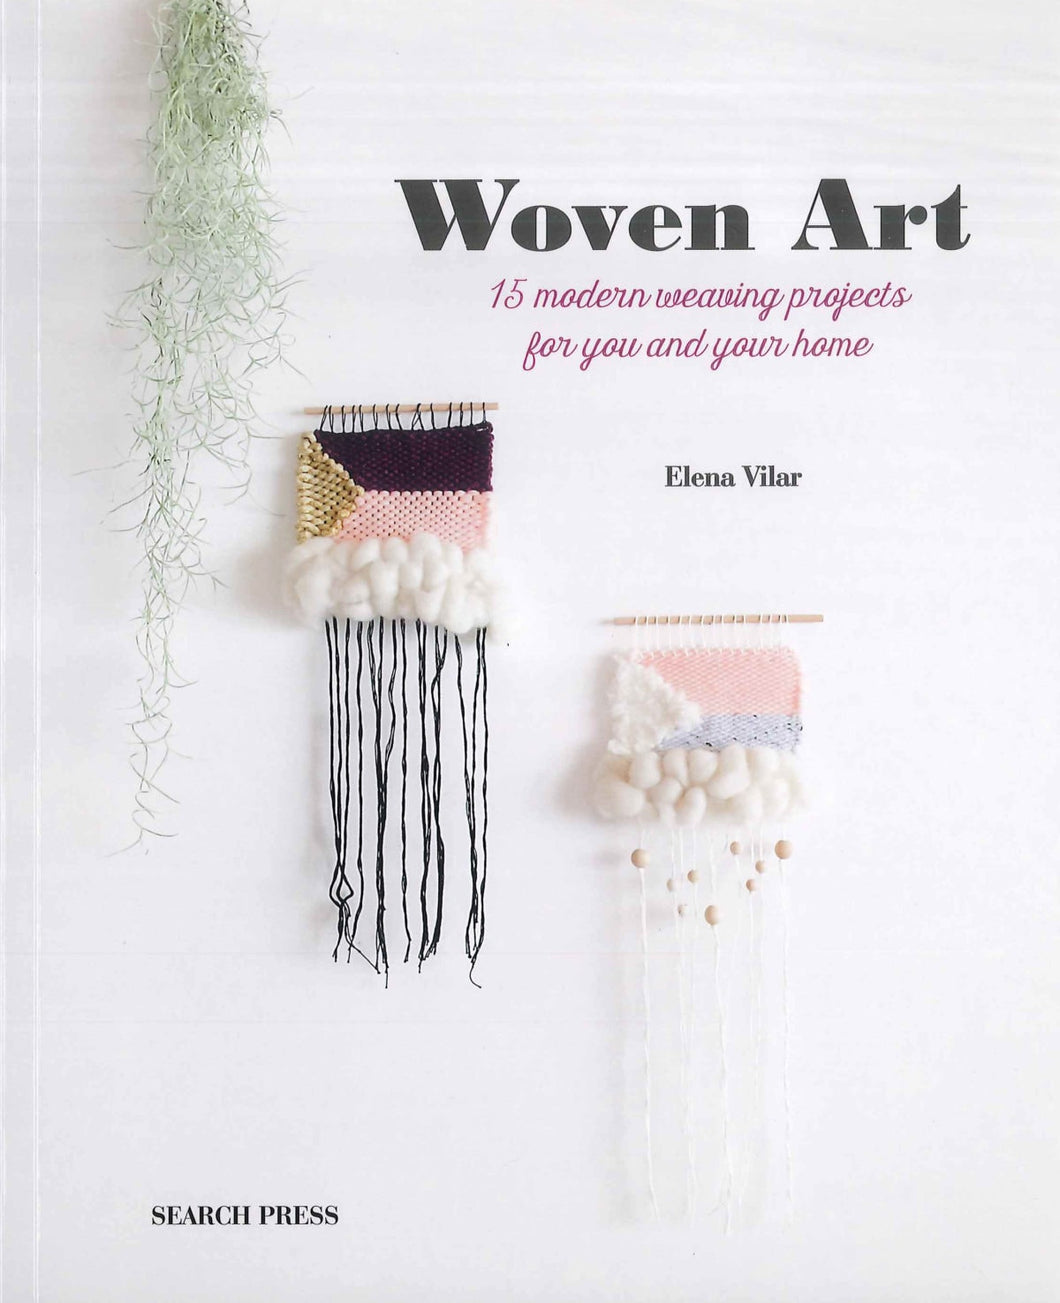 Woven Art: 15 Modern Weaving Projects for You and Your Home by Elena Vilar